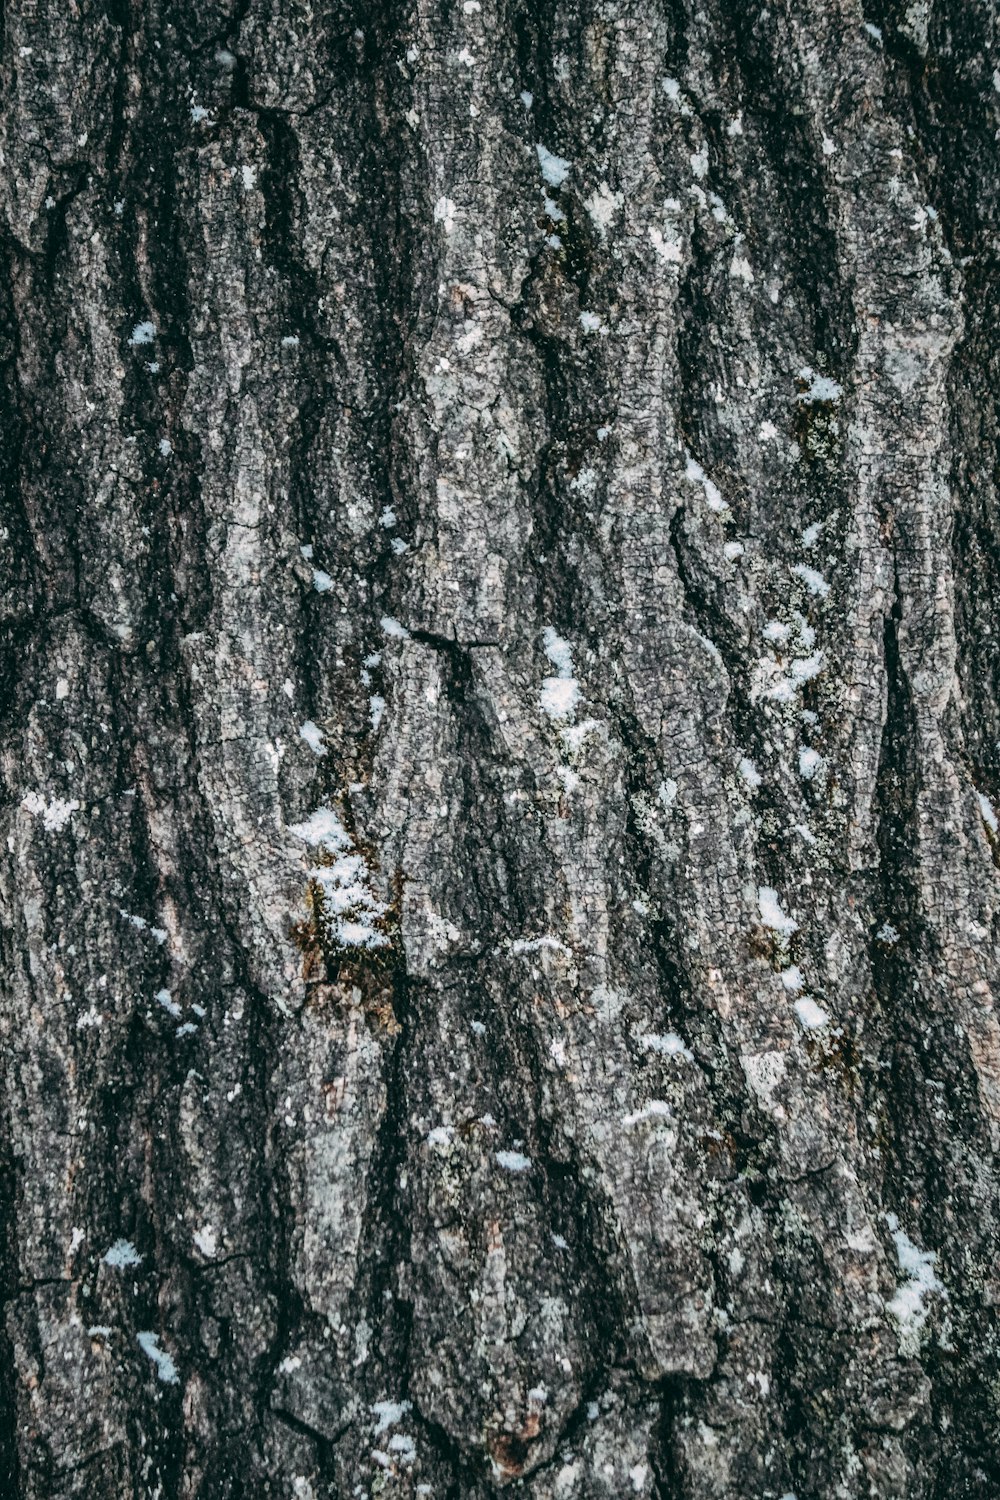 a close up of a tree trunk with snow on it